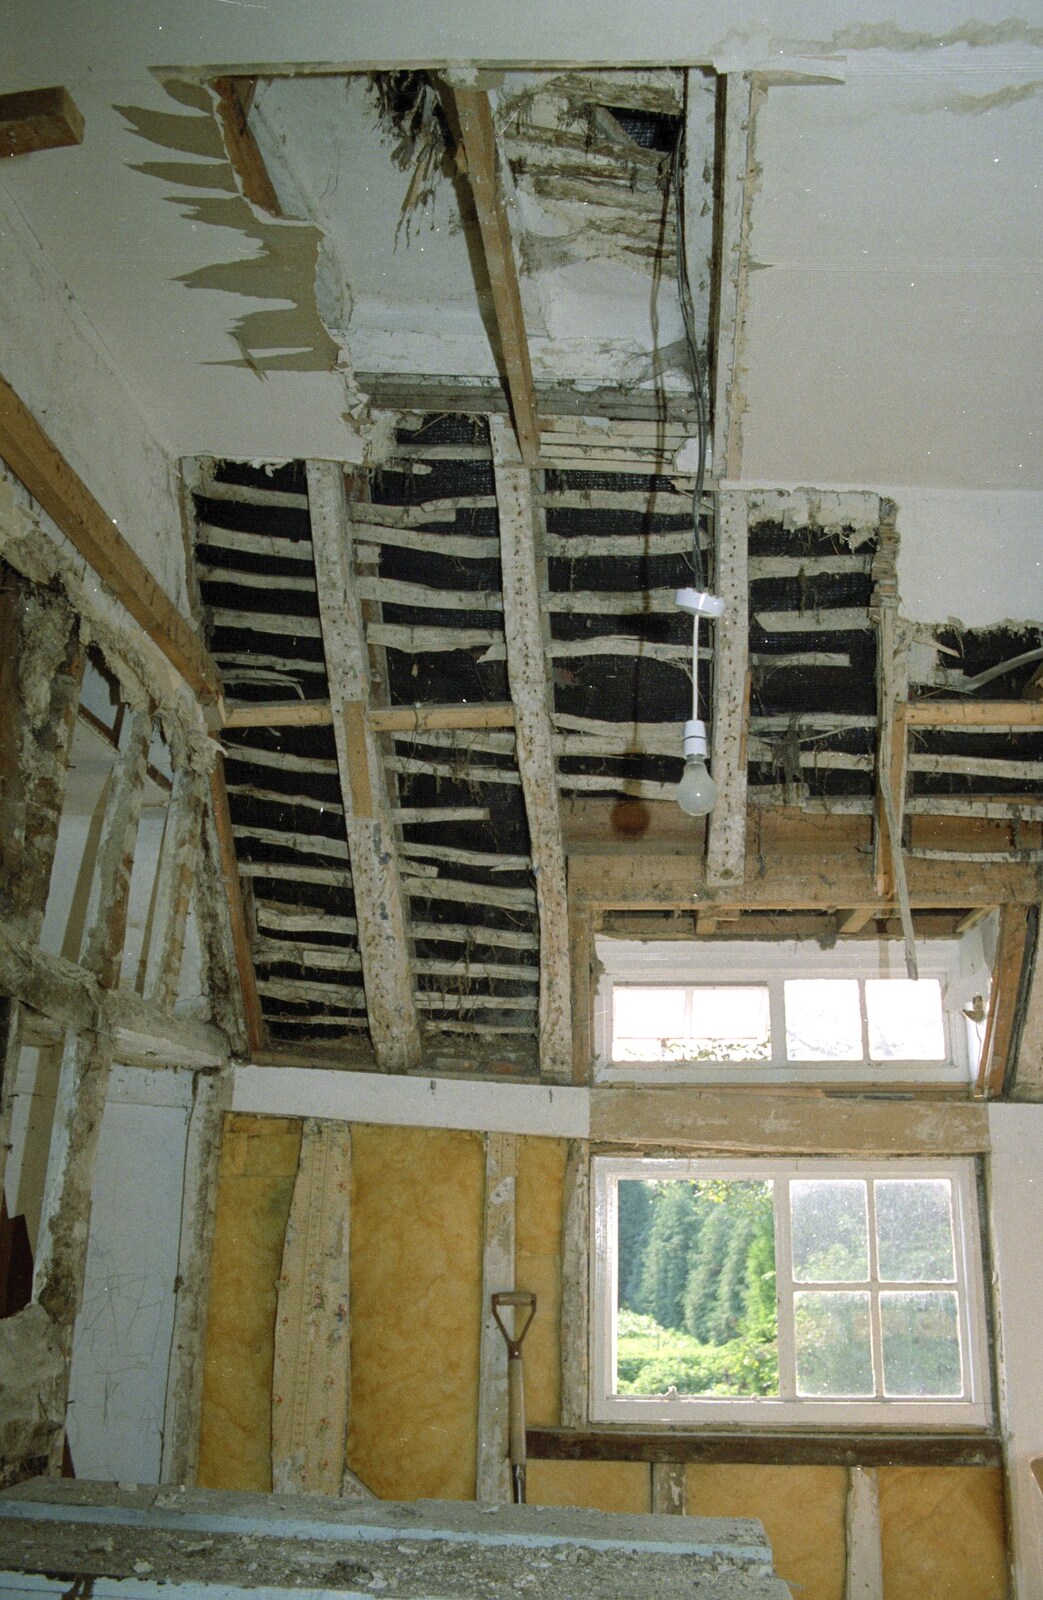 The hidden original ceiling is revealed from Bedroom Demolition, Brome, Suffolk - 15th May 1995